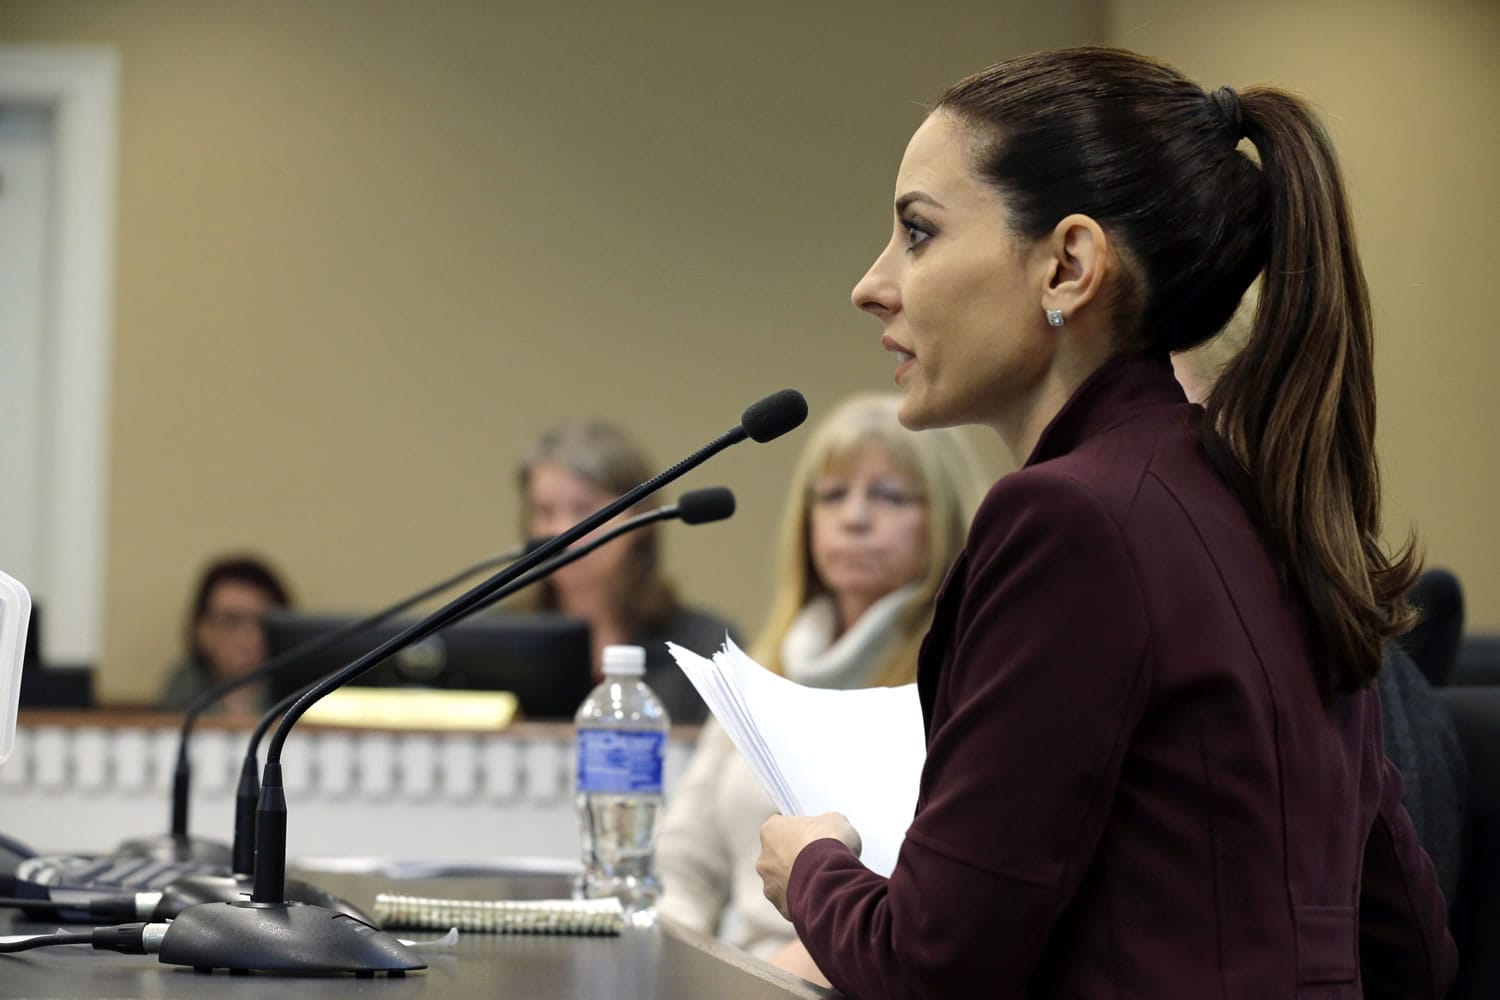 In this photo taken Jan. 20, 2016, Kerri Kasem, right, the daughter of the late radio personality Casey Kasem, waits to testify during a hearing at the Capitol in Olympia, Wash. Kasem and others are seeking easier ways for family and friends to visit ailing elders, after she was blocked from seeing her father, who died at 82 in Gig Harbor, Wash., in 2014 due to a long legal battle over his care between his three adult children from a previous marriage and Jean Kasem, his second wife. (AP Photo/Ted S. Warren) (Photos by Ted S.